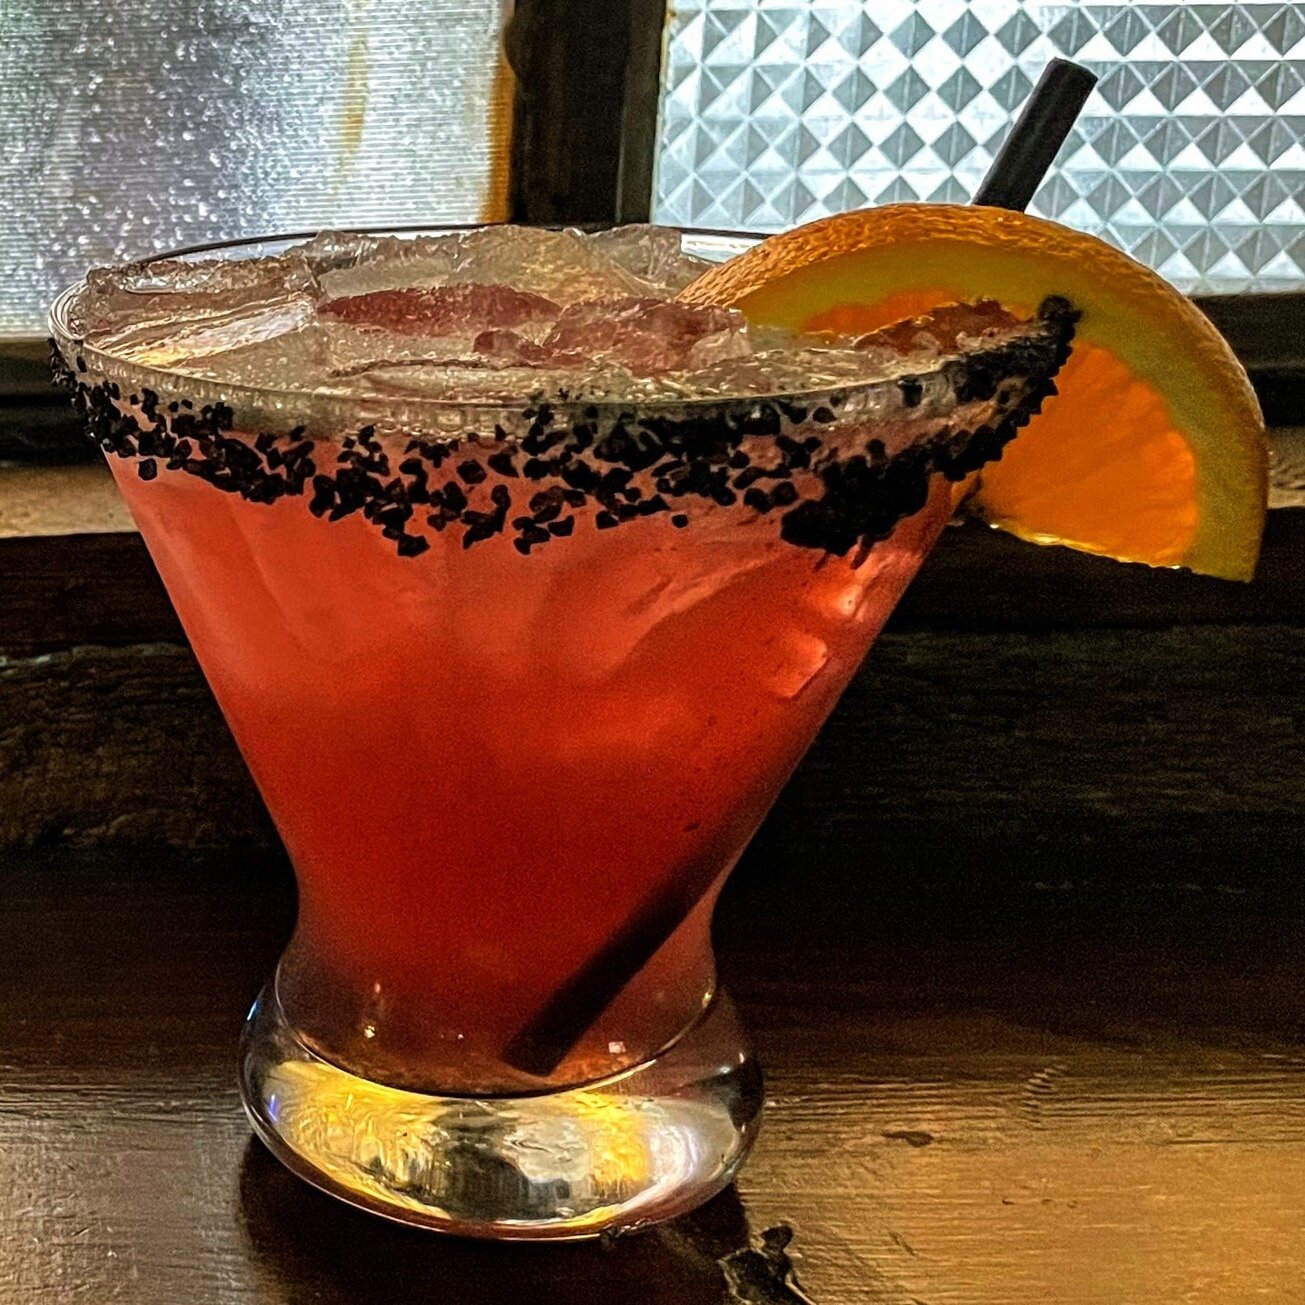 The Prickly Pear Margarita is the perfect choice when you're in the mood for a sweeter margarita. Made with Patron Silver tequila, Cointreau, agave, fresh lime juice, and prickly pear syrup, this cocktail is sure to satisfy on a sunny spring day! Als